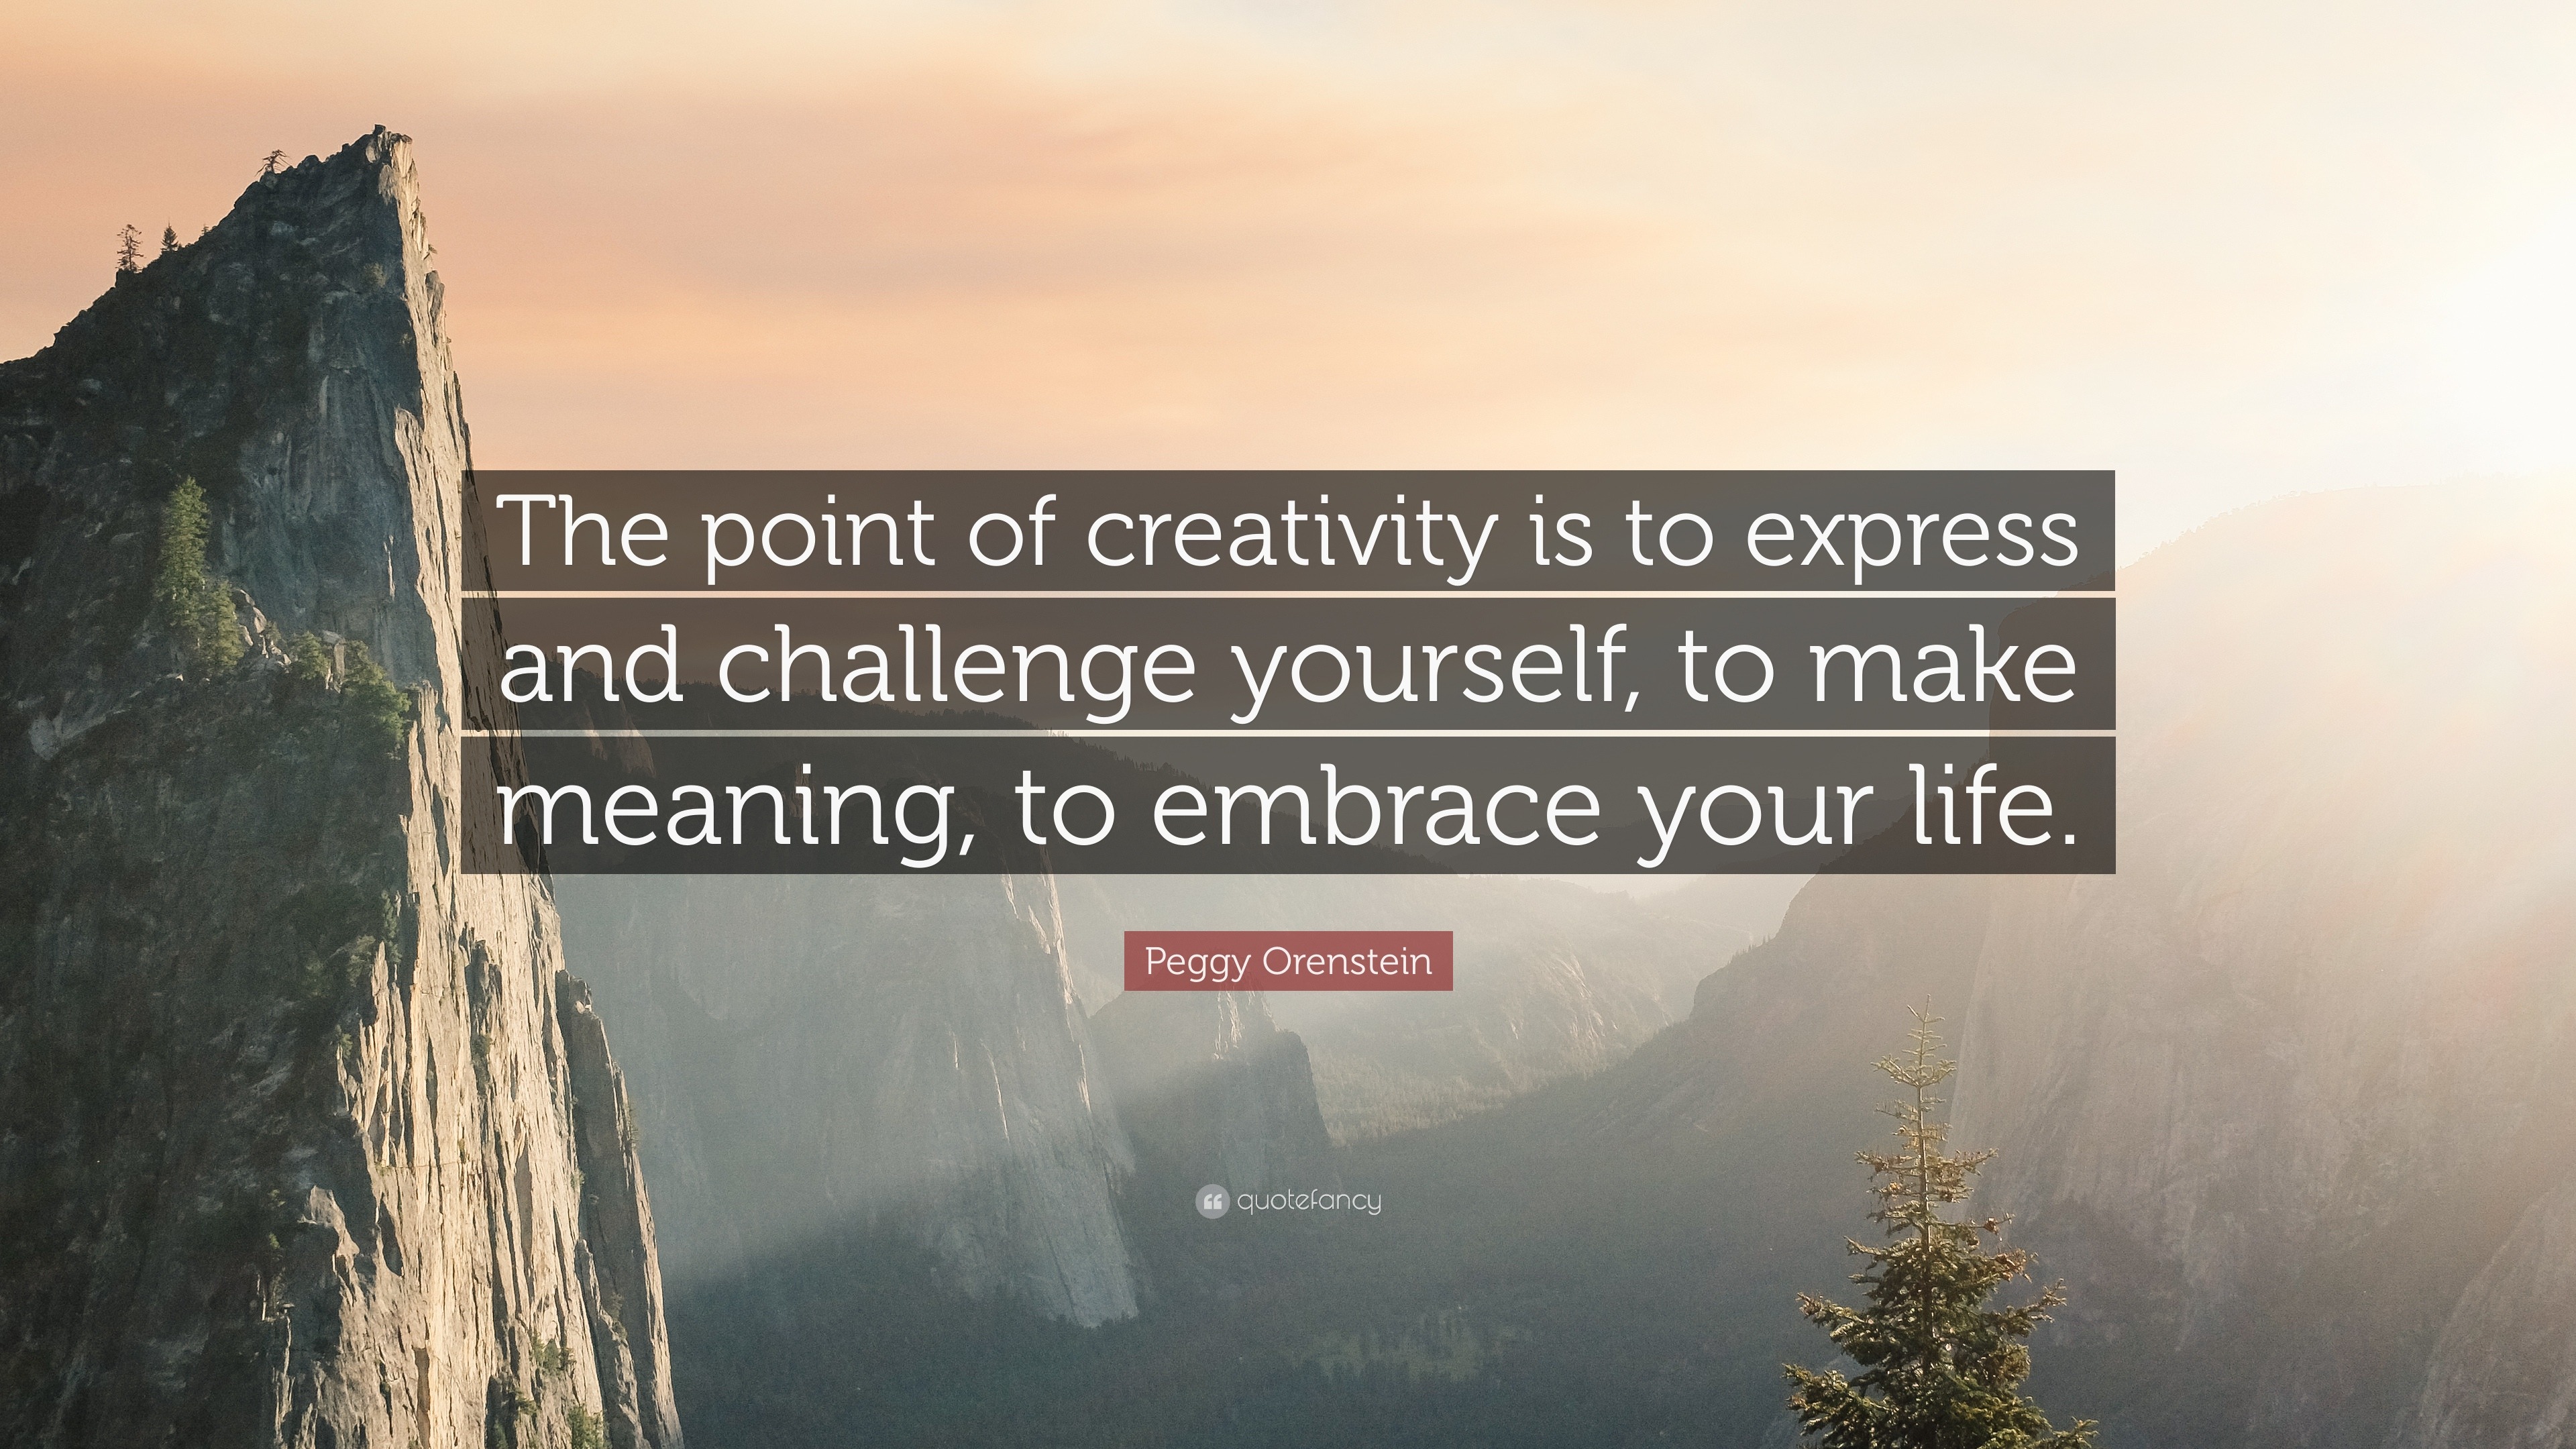 Peggy Orenstein Quote “The point of creativity is to express and challenge yourself